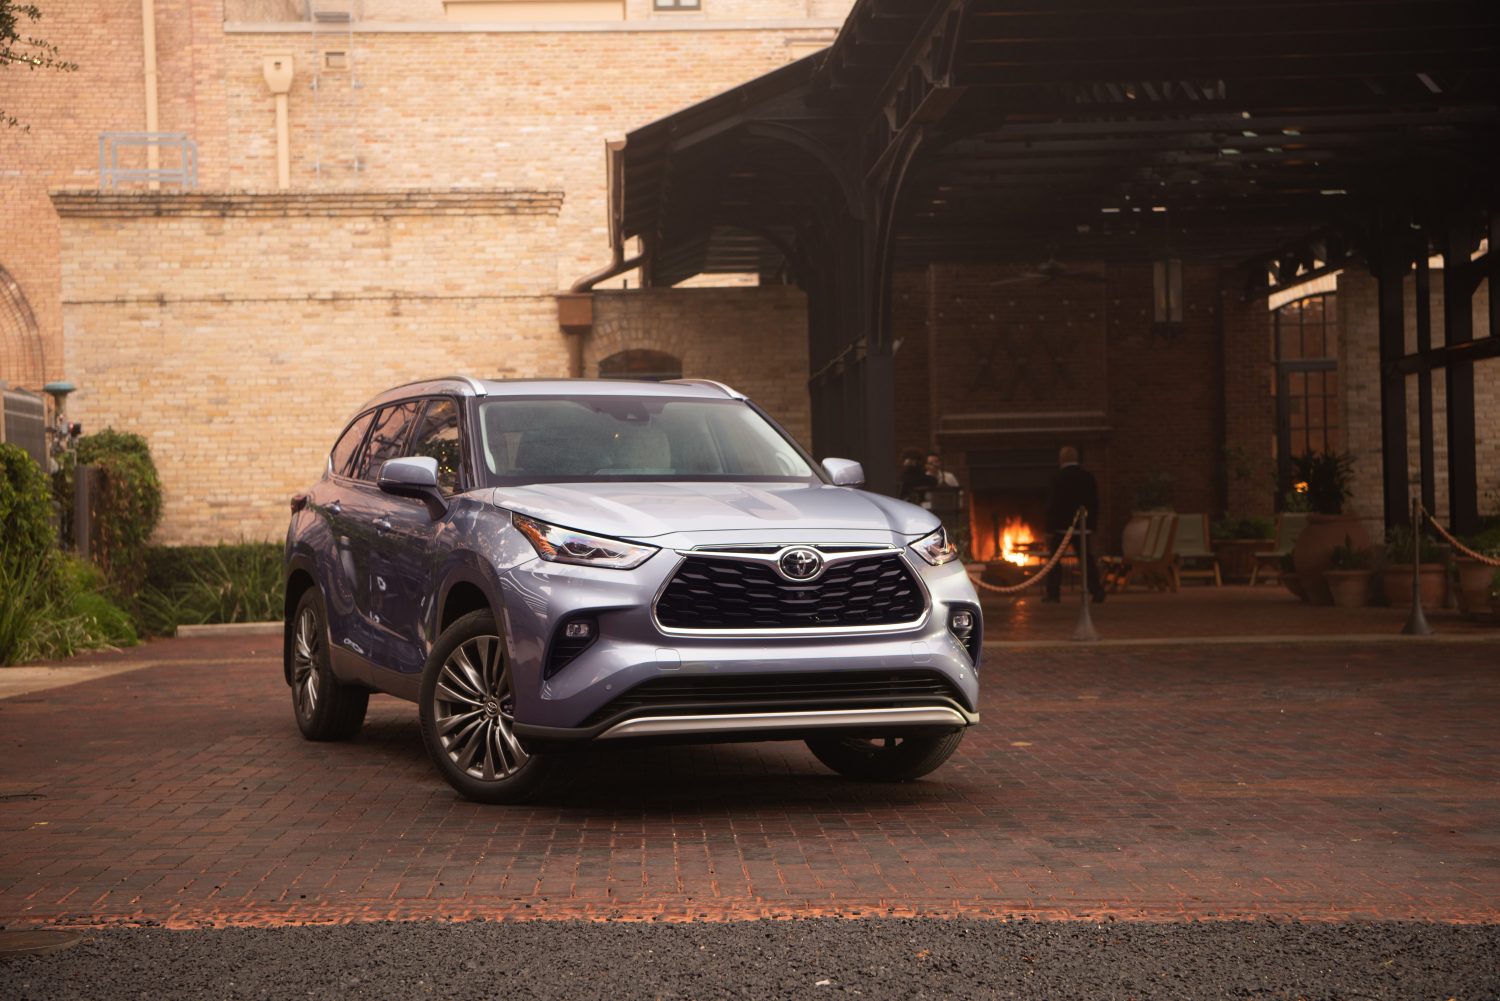 Promo shot of a blue 2022 Toyota Highlander Platinum crossover SUV parked in front of a white brick building.